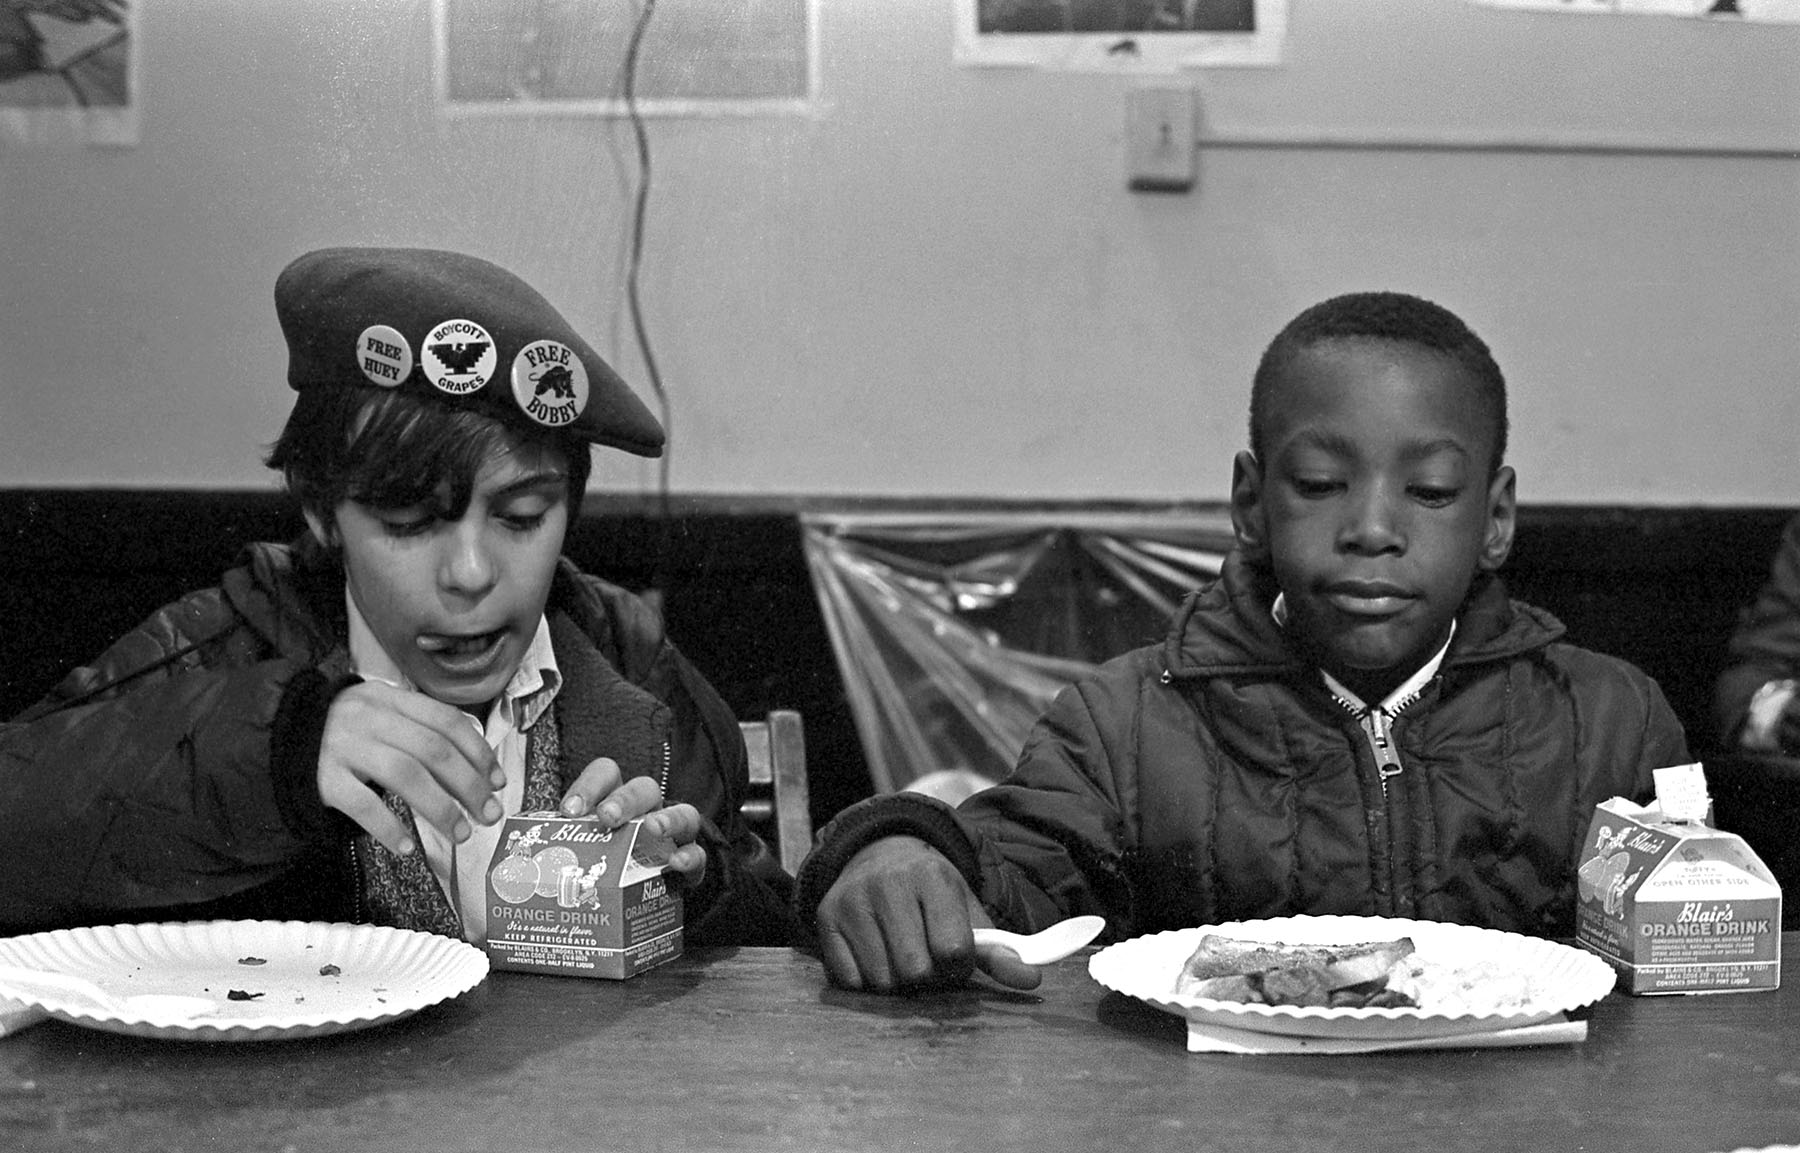 Two young boys seated at a table eat breakfast. The boy on the left wears a beret with buttons that read 